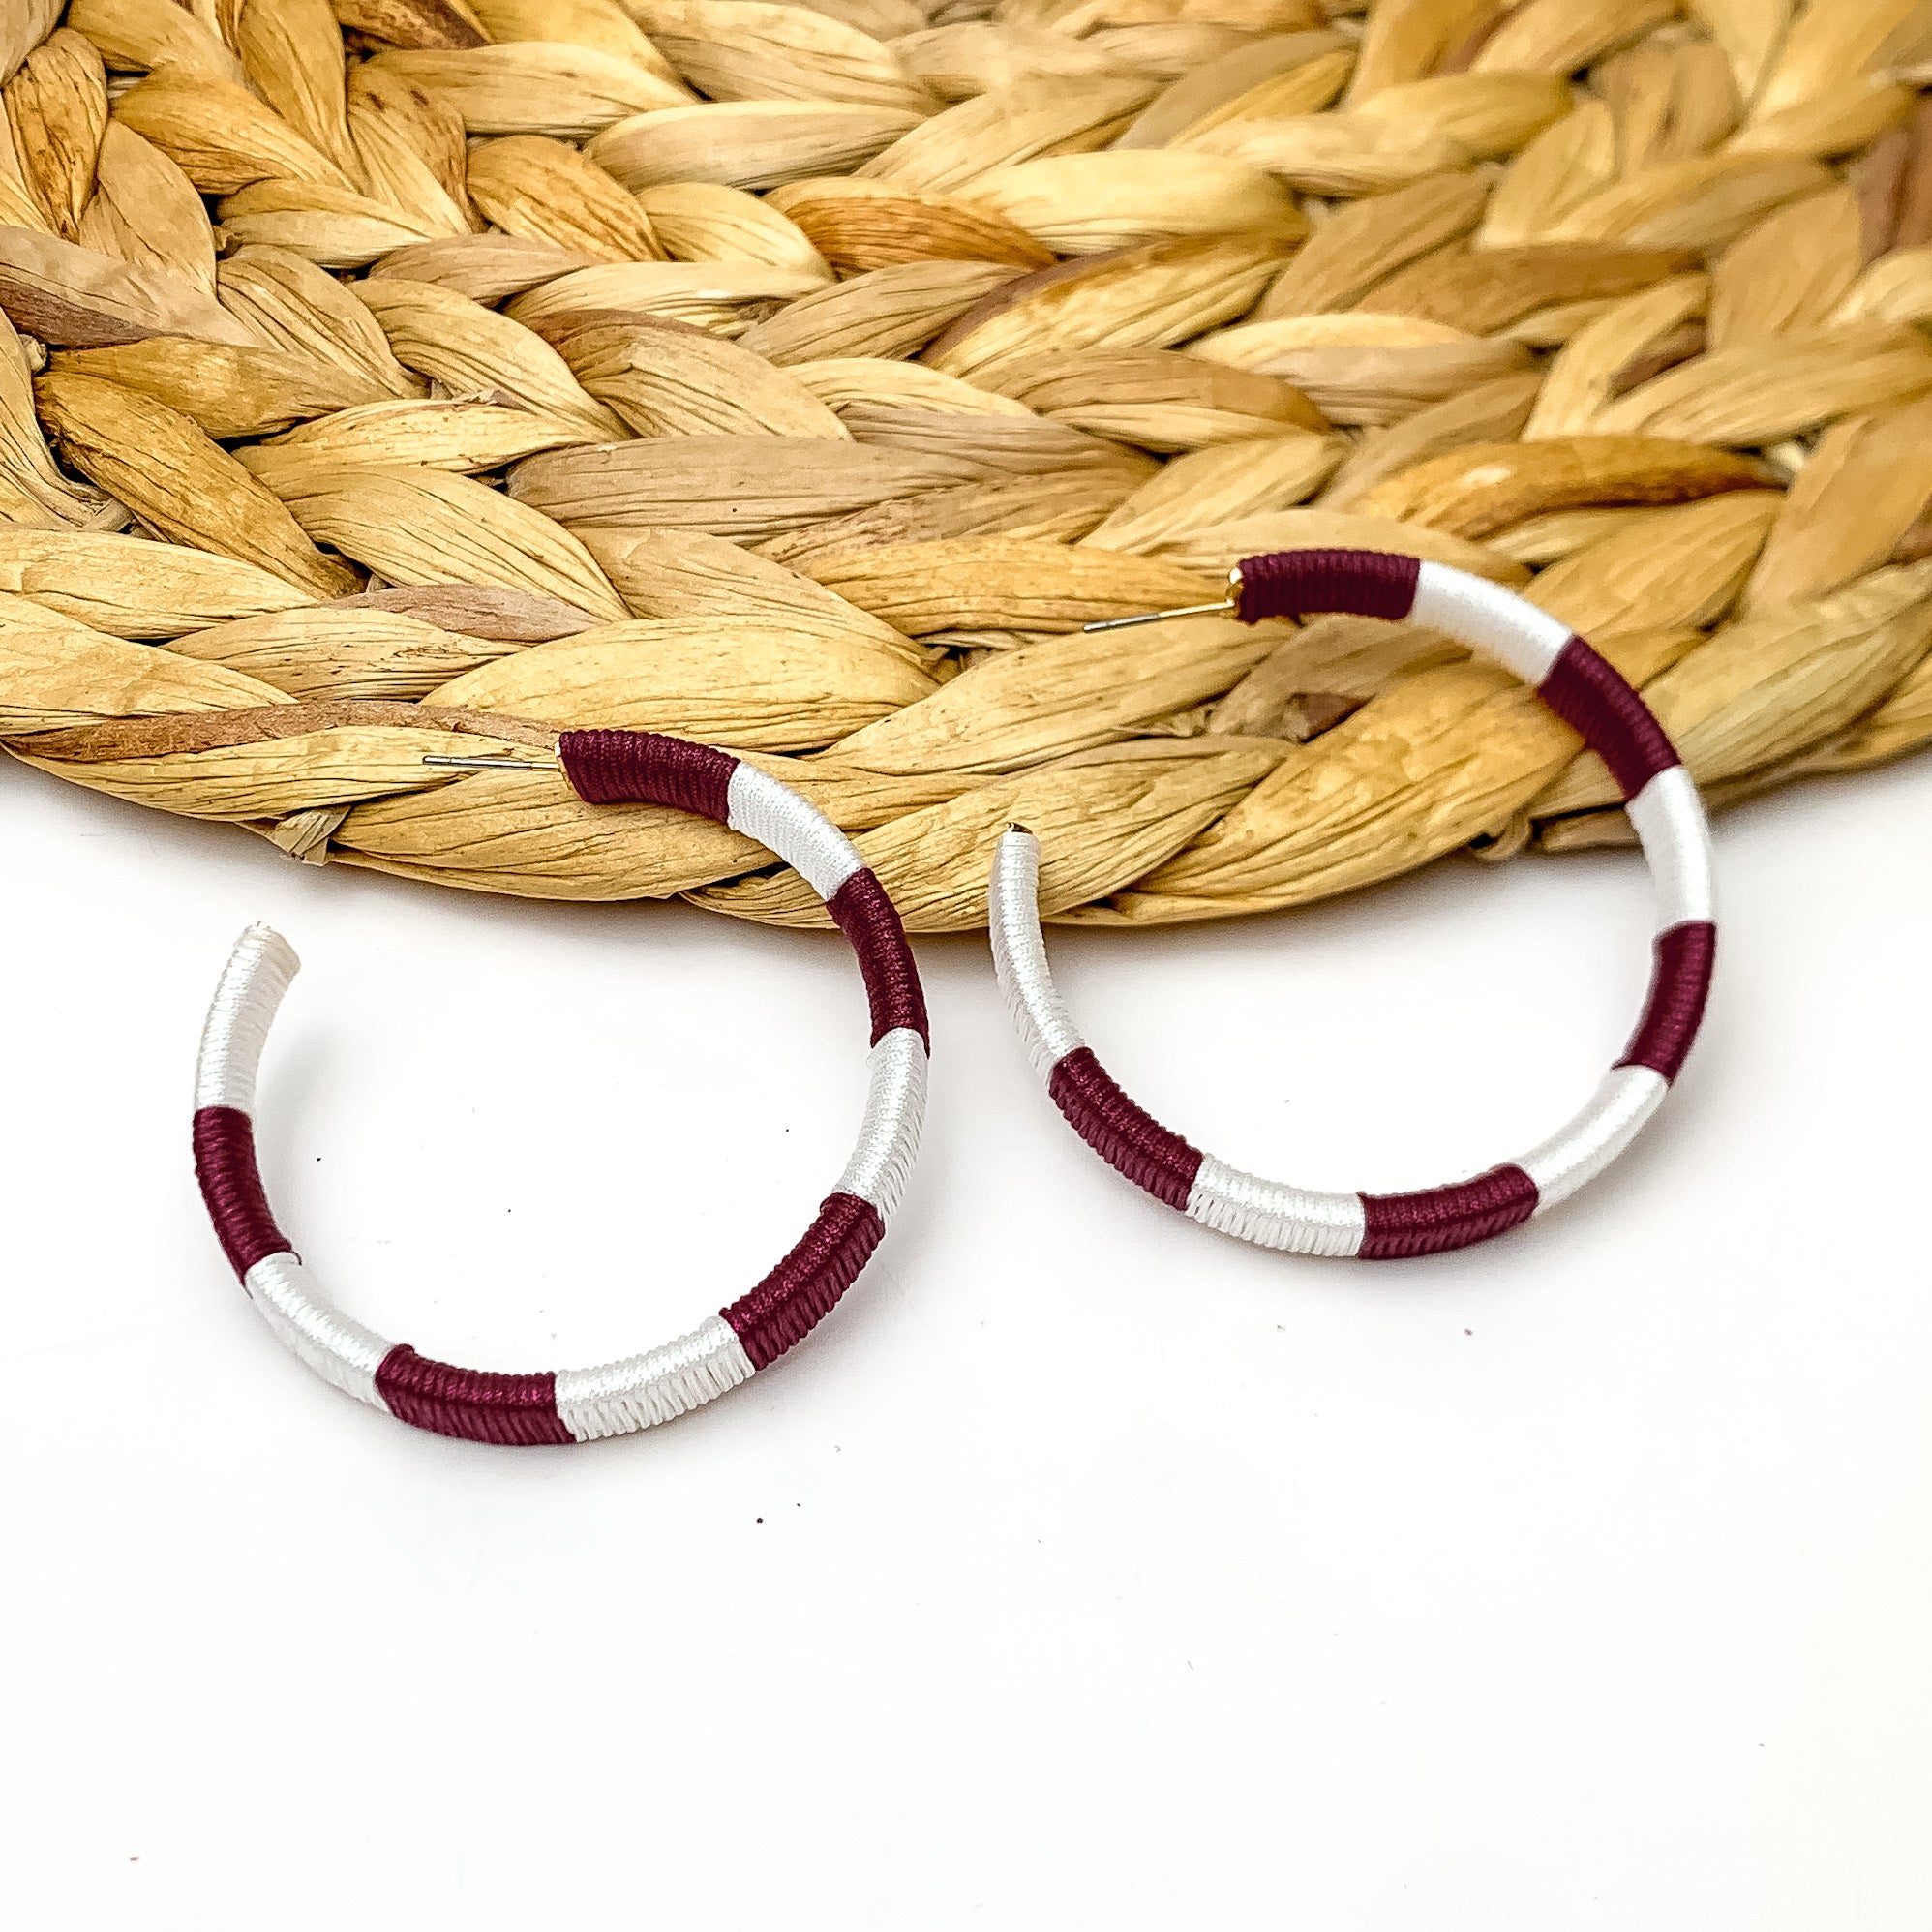 Game Day Glam Colored Hoop Earrings in Maroon and White. The two colored hoops are laying against a woven decoration with a white background.